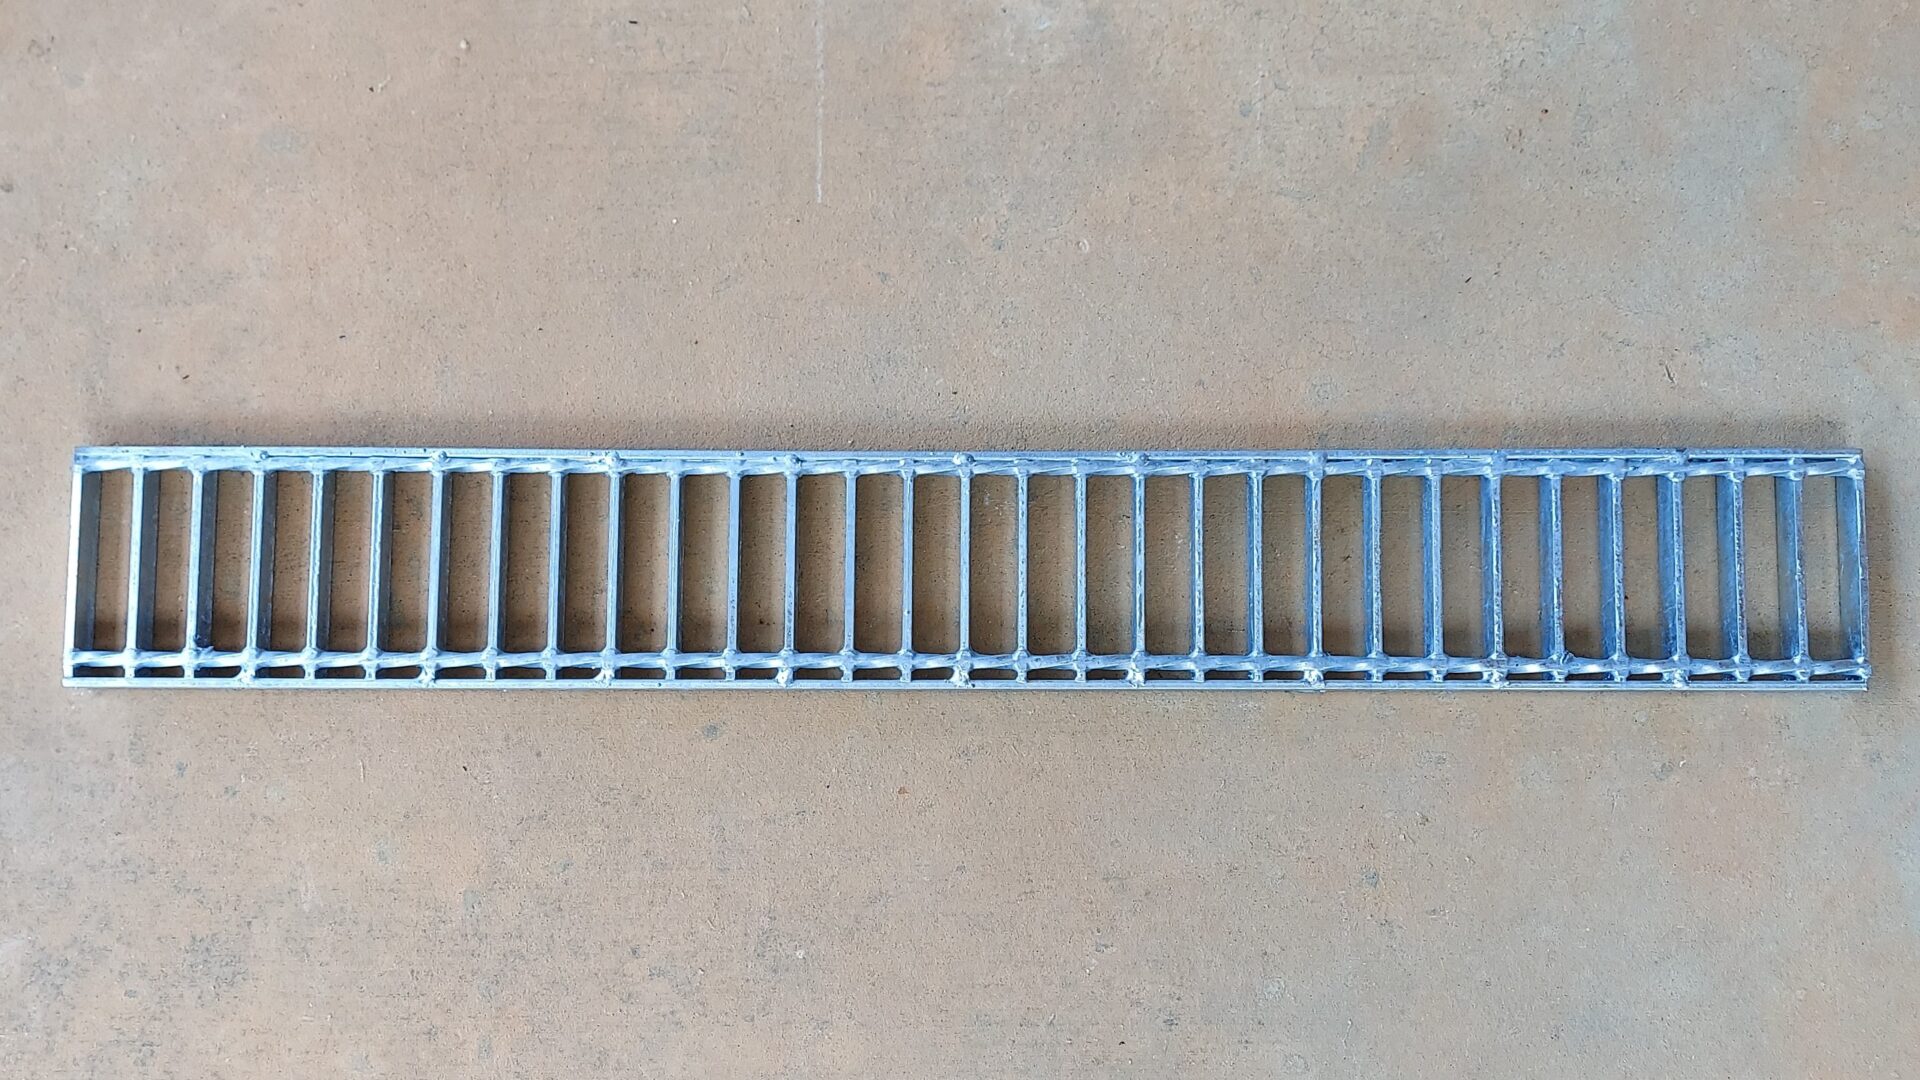 Stainless Steel Wire Grate - 12 x 16 x 7/8, Half Sheet H-10794